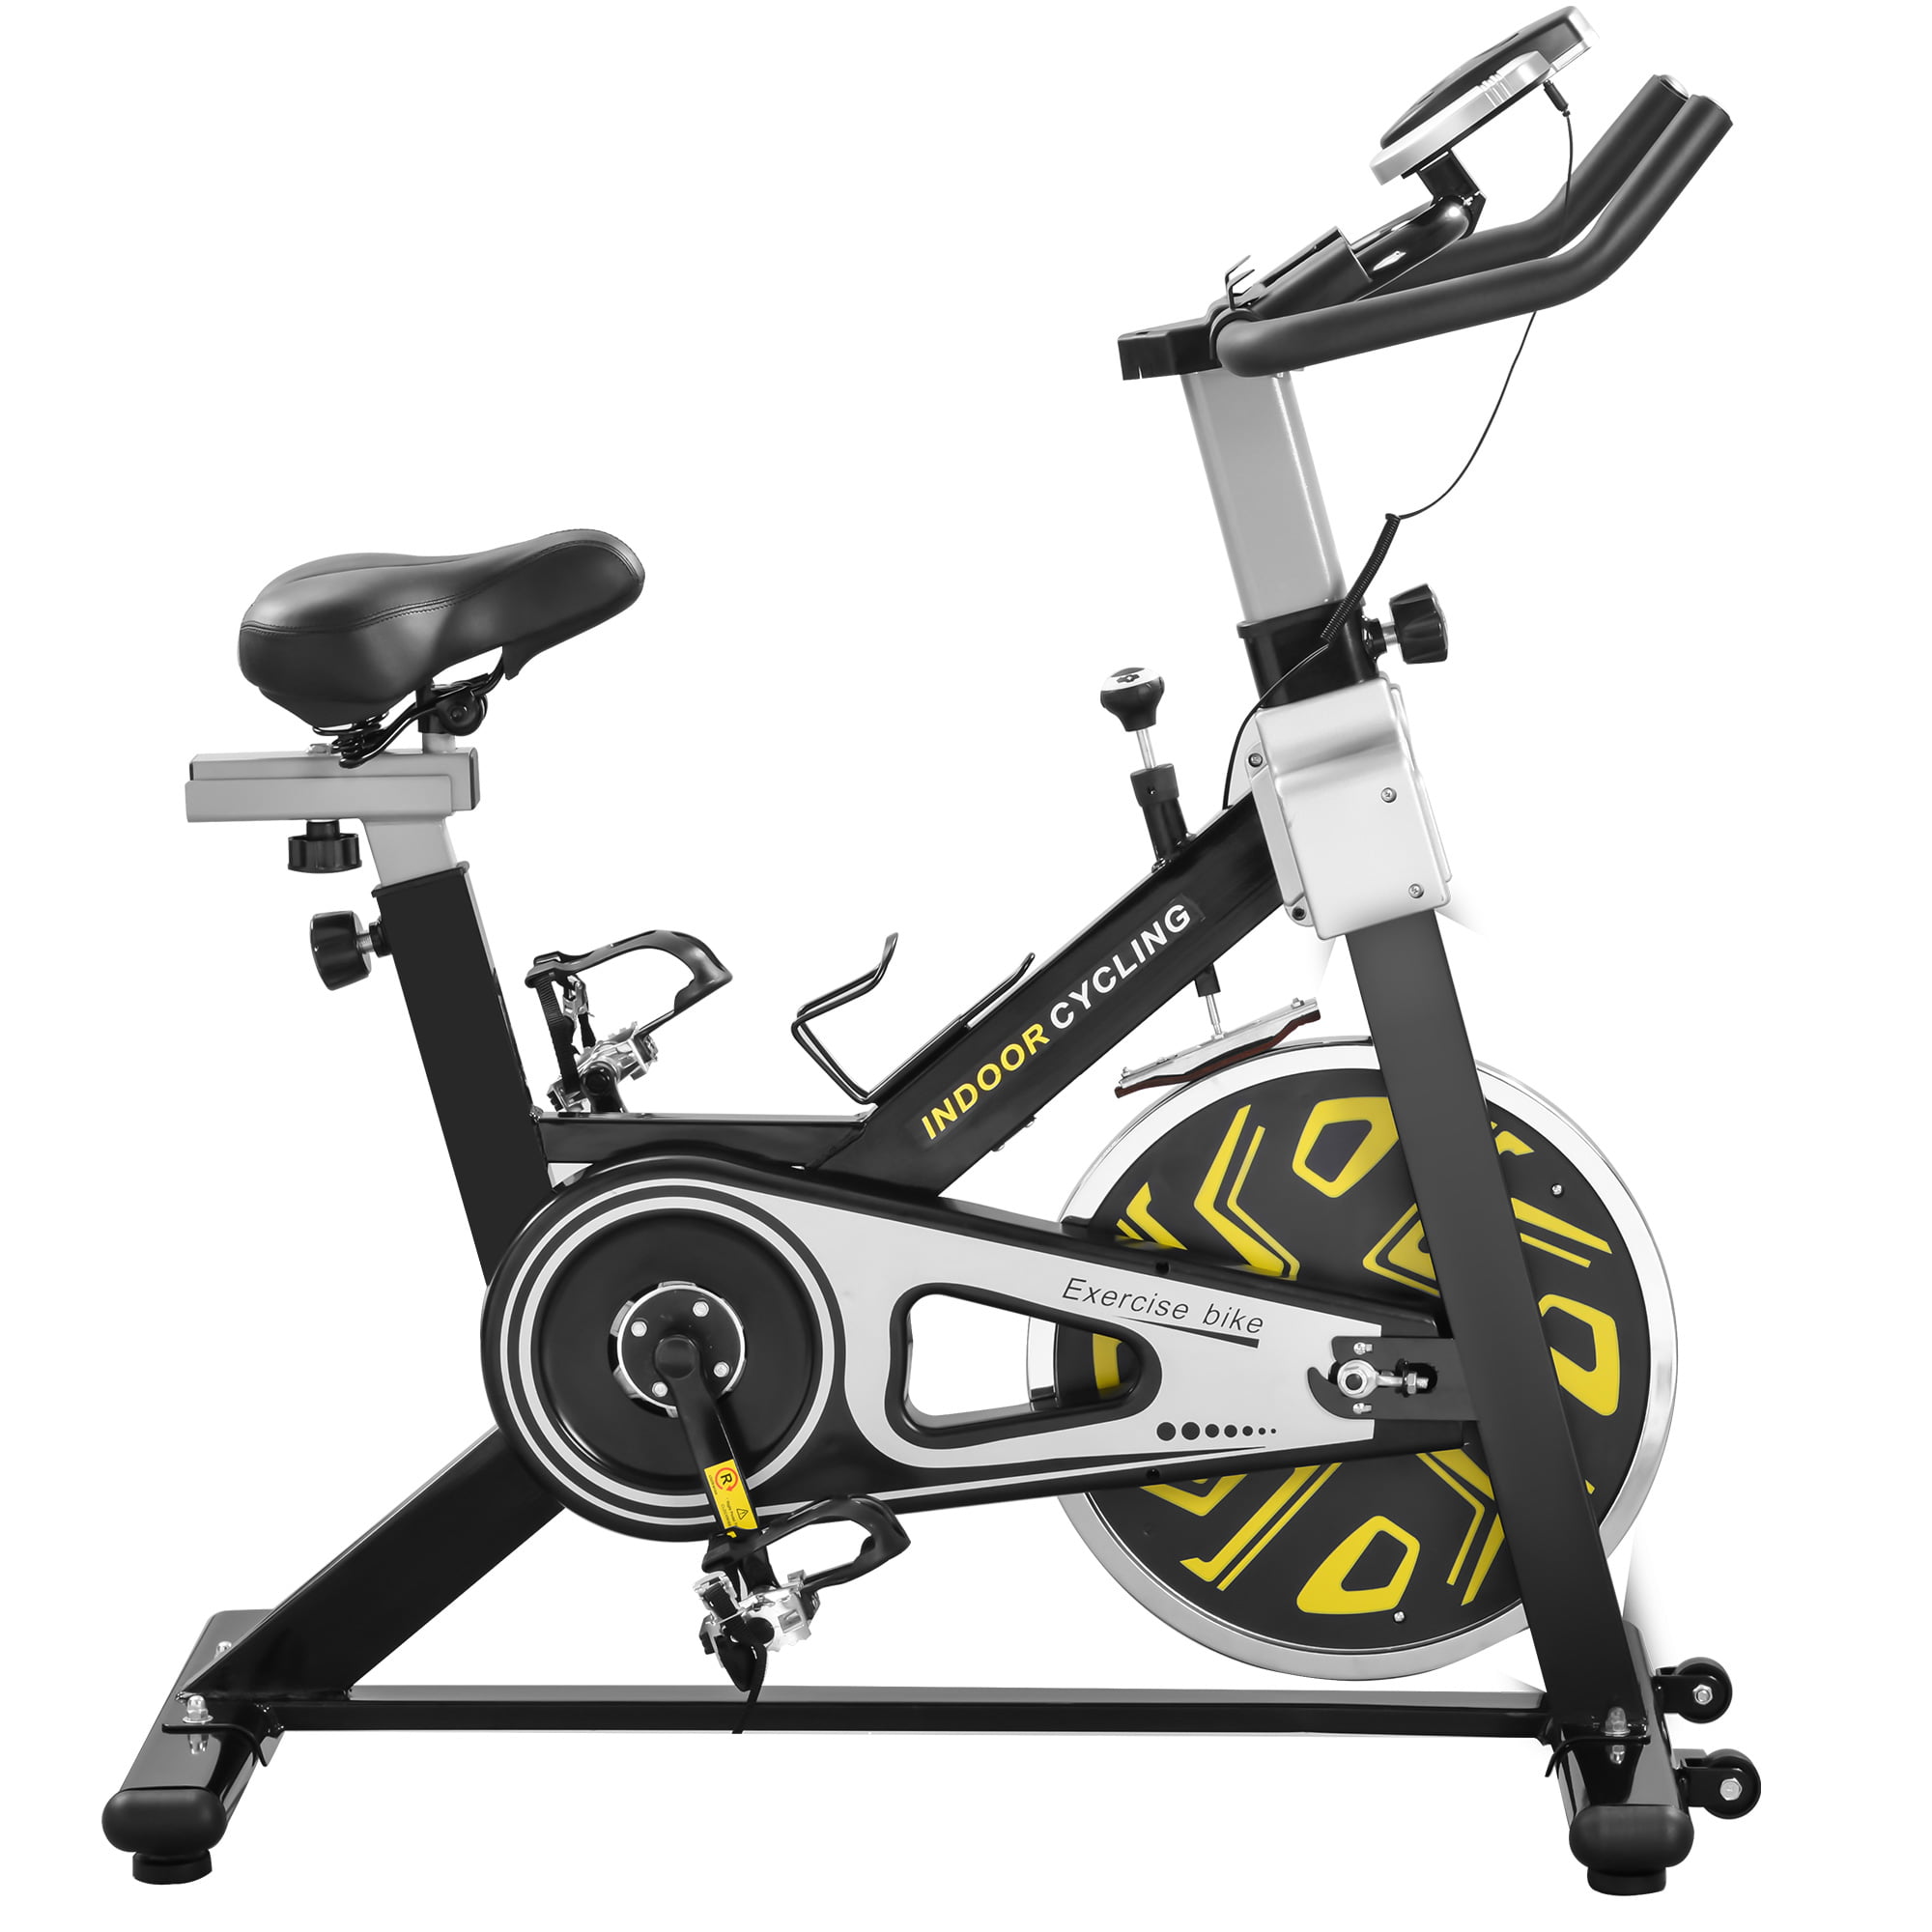 Details about   Pro Home Exercise Bike Cycling Stationary Bike Fitness Gym Bike Cardio Workout 